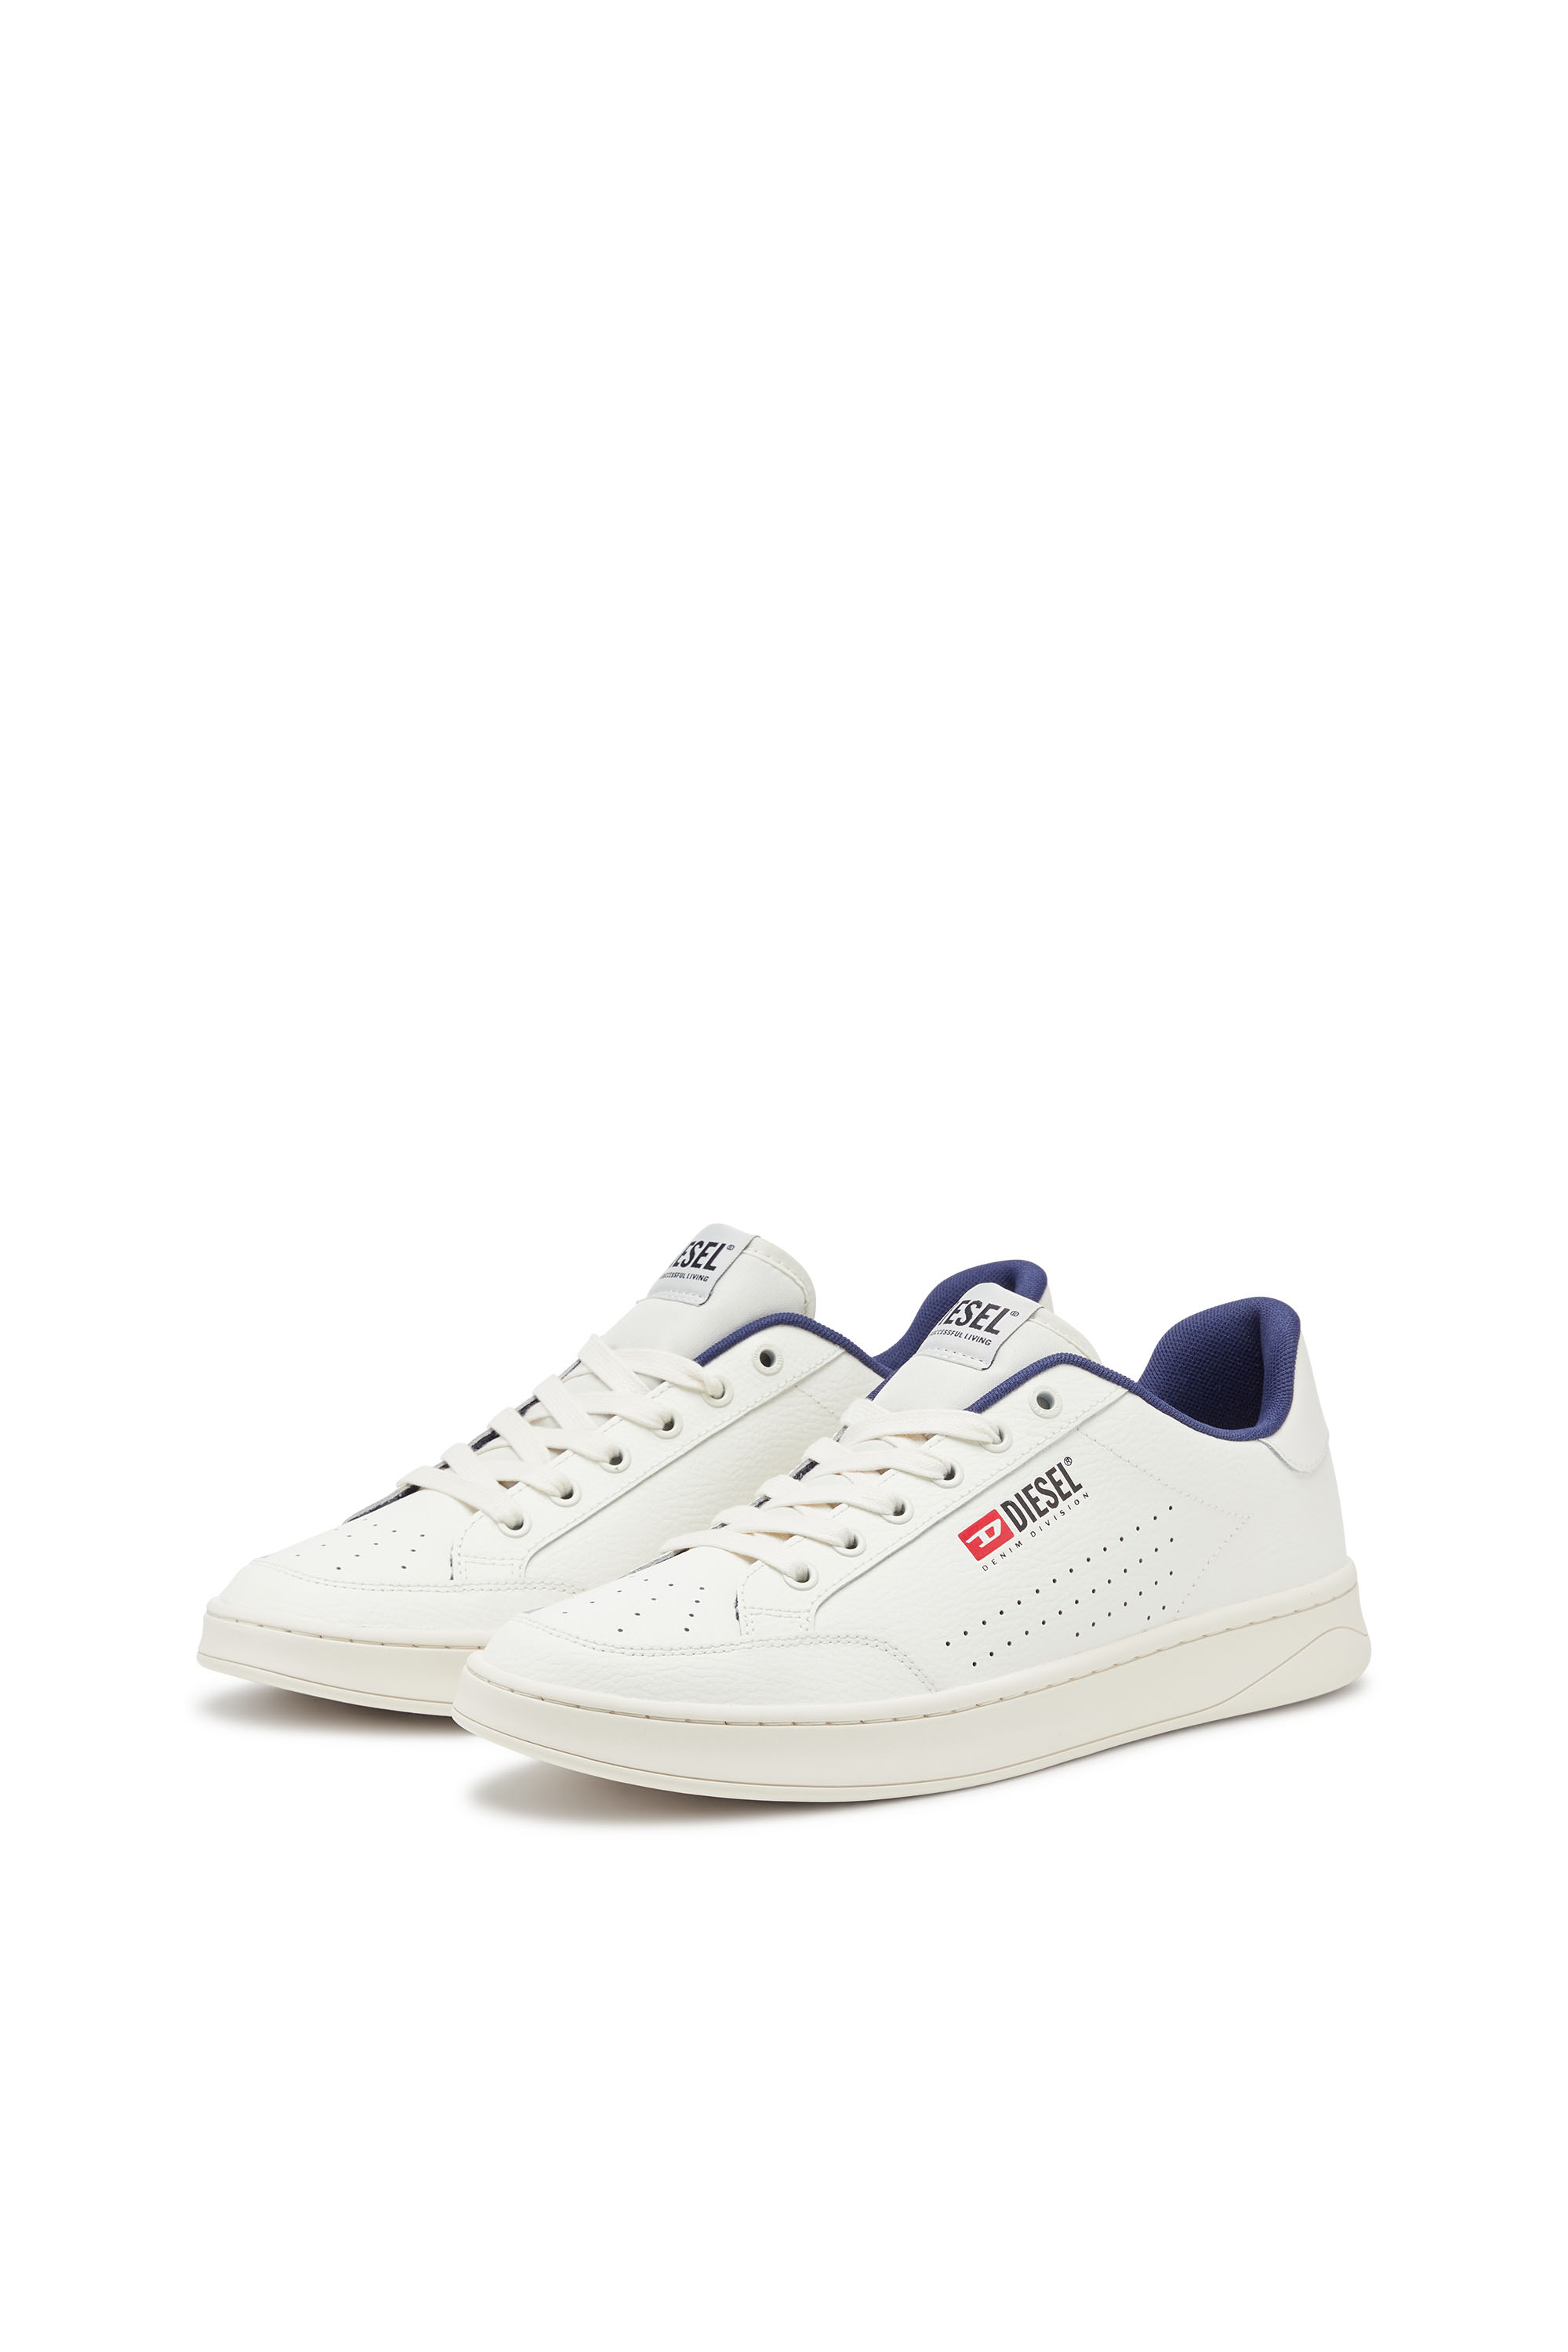 Diesel - S-ATHENE VTG, Man S-Athene-Retro sneakers in perforated leather in Multicolor - Image 8